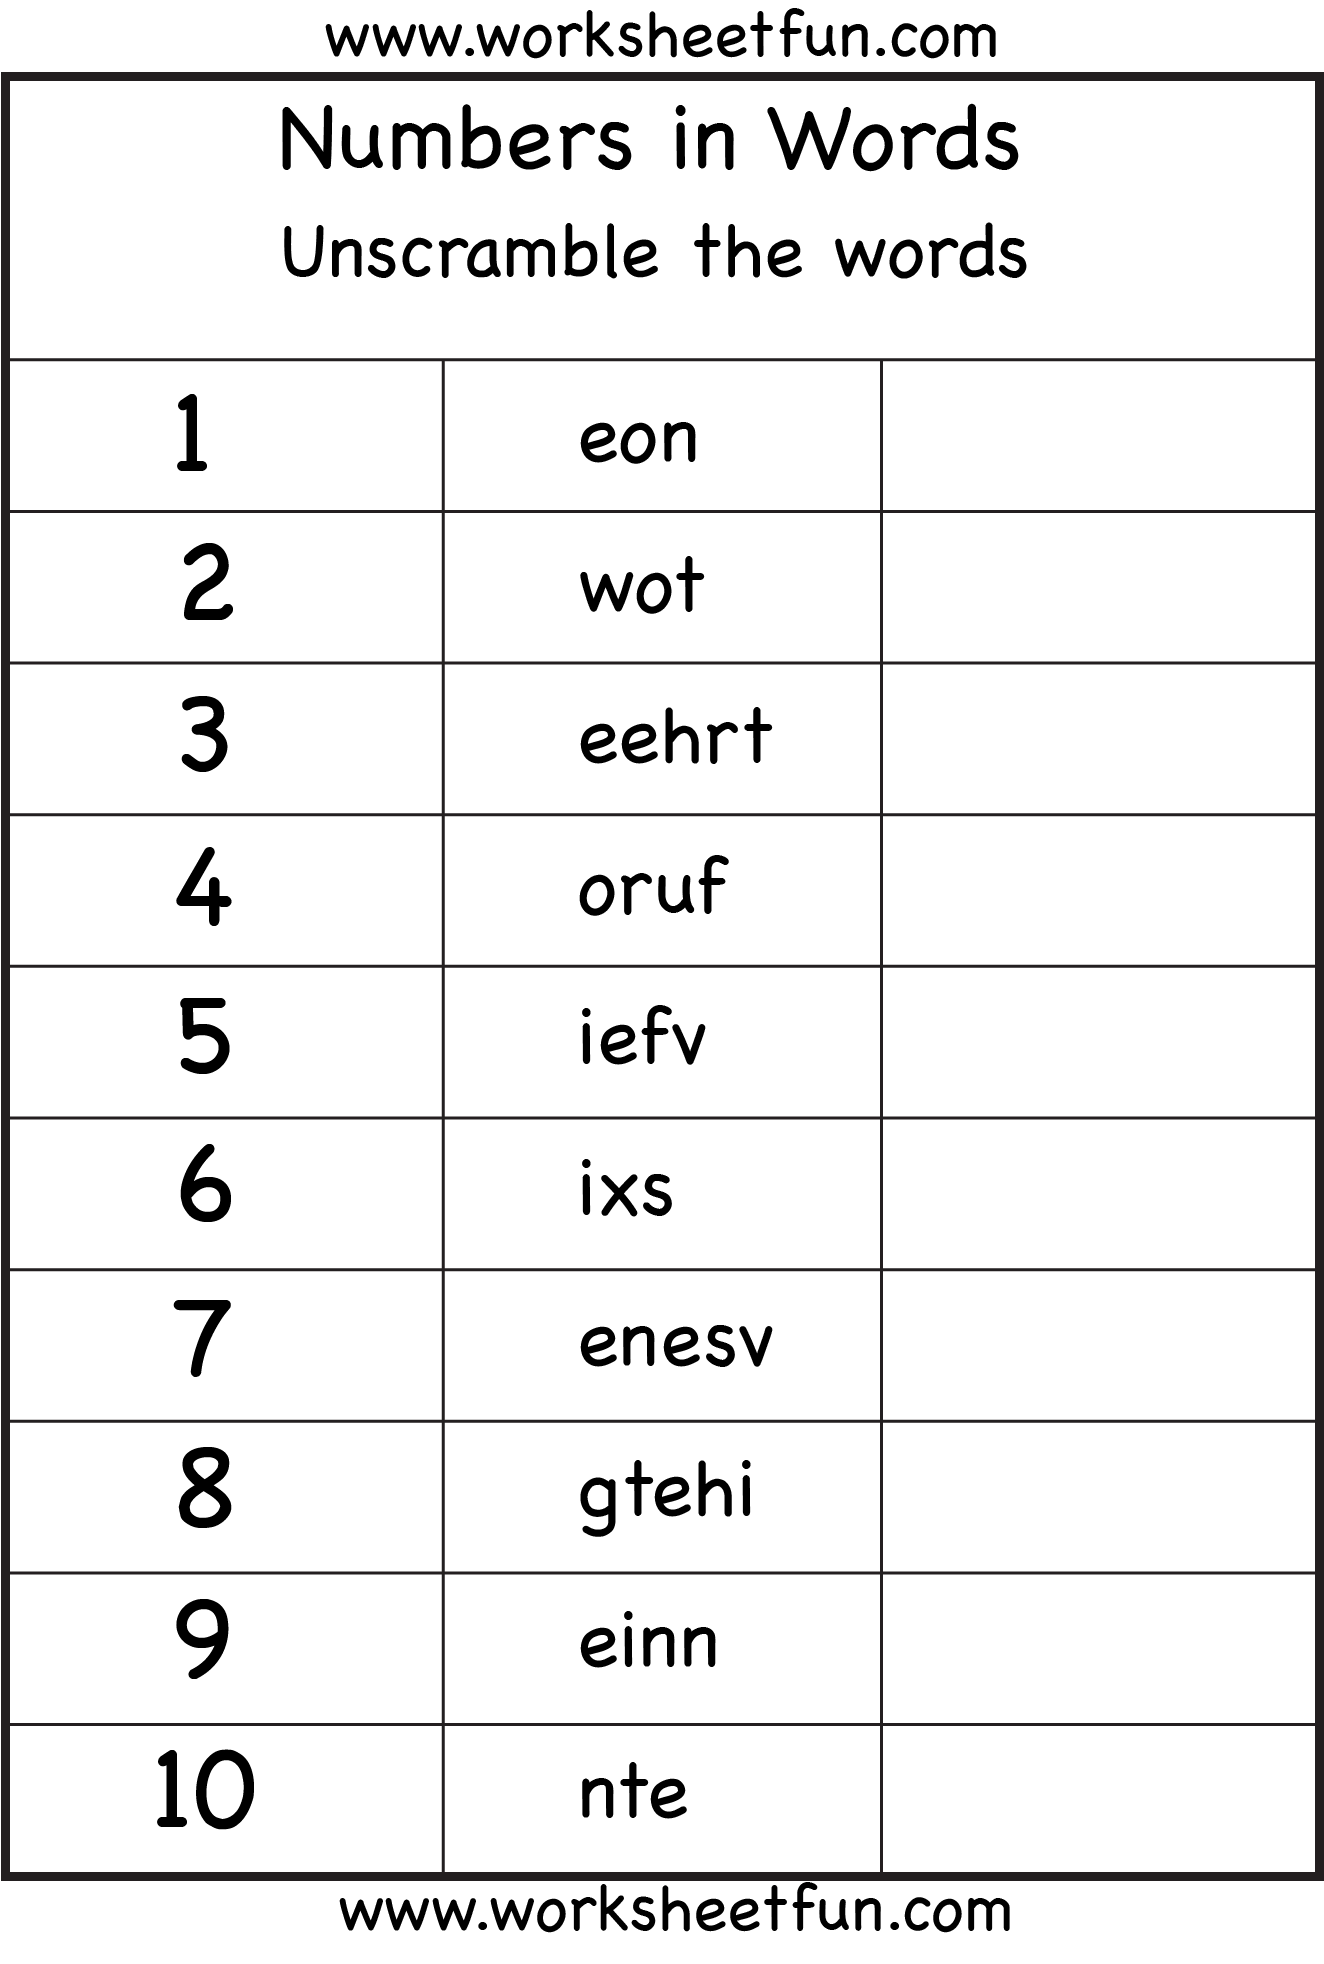 spelling-numbers-worksheets-1-10-lily-moje-zycie2